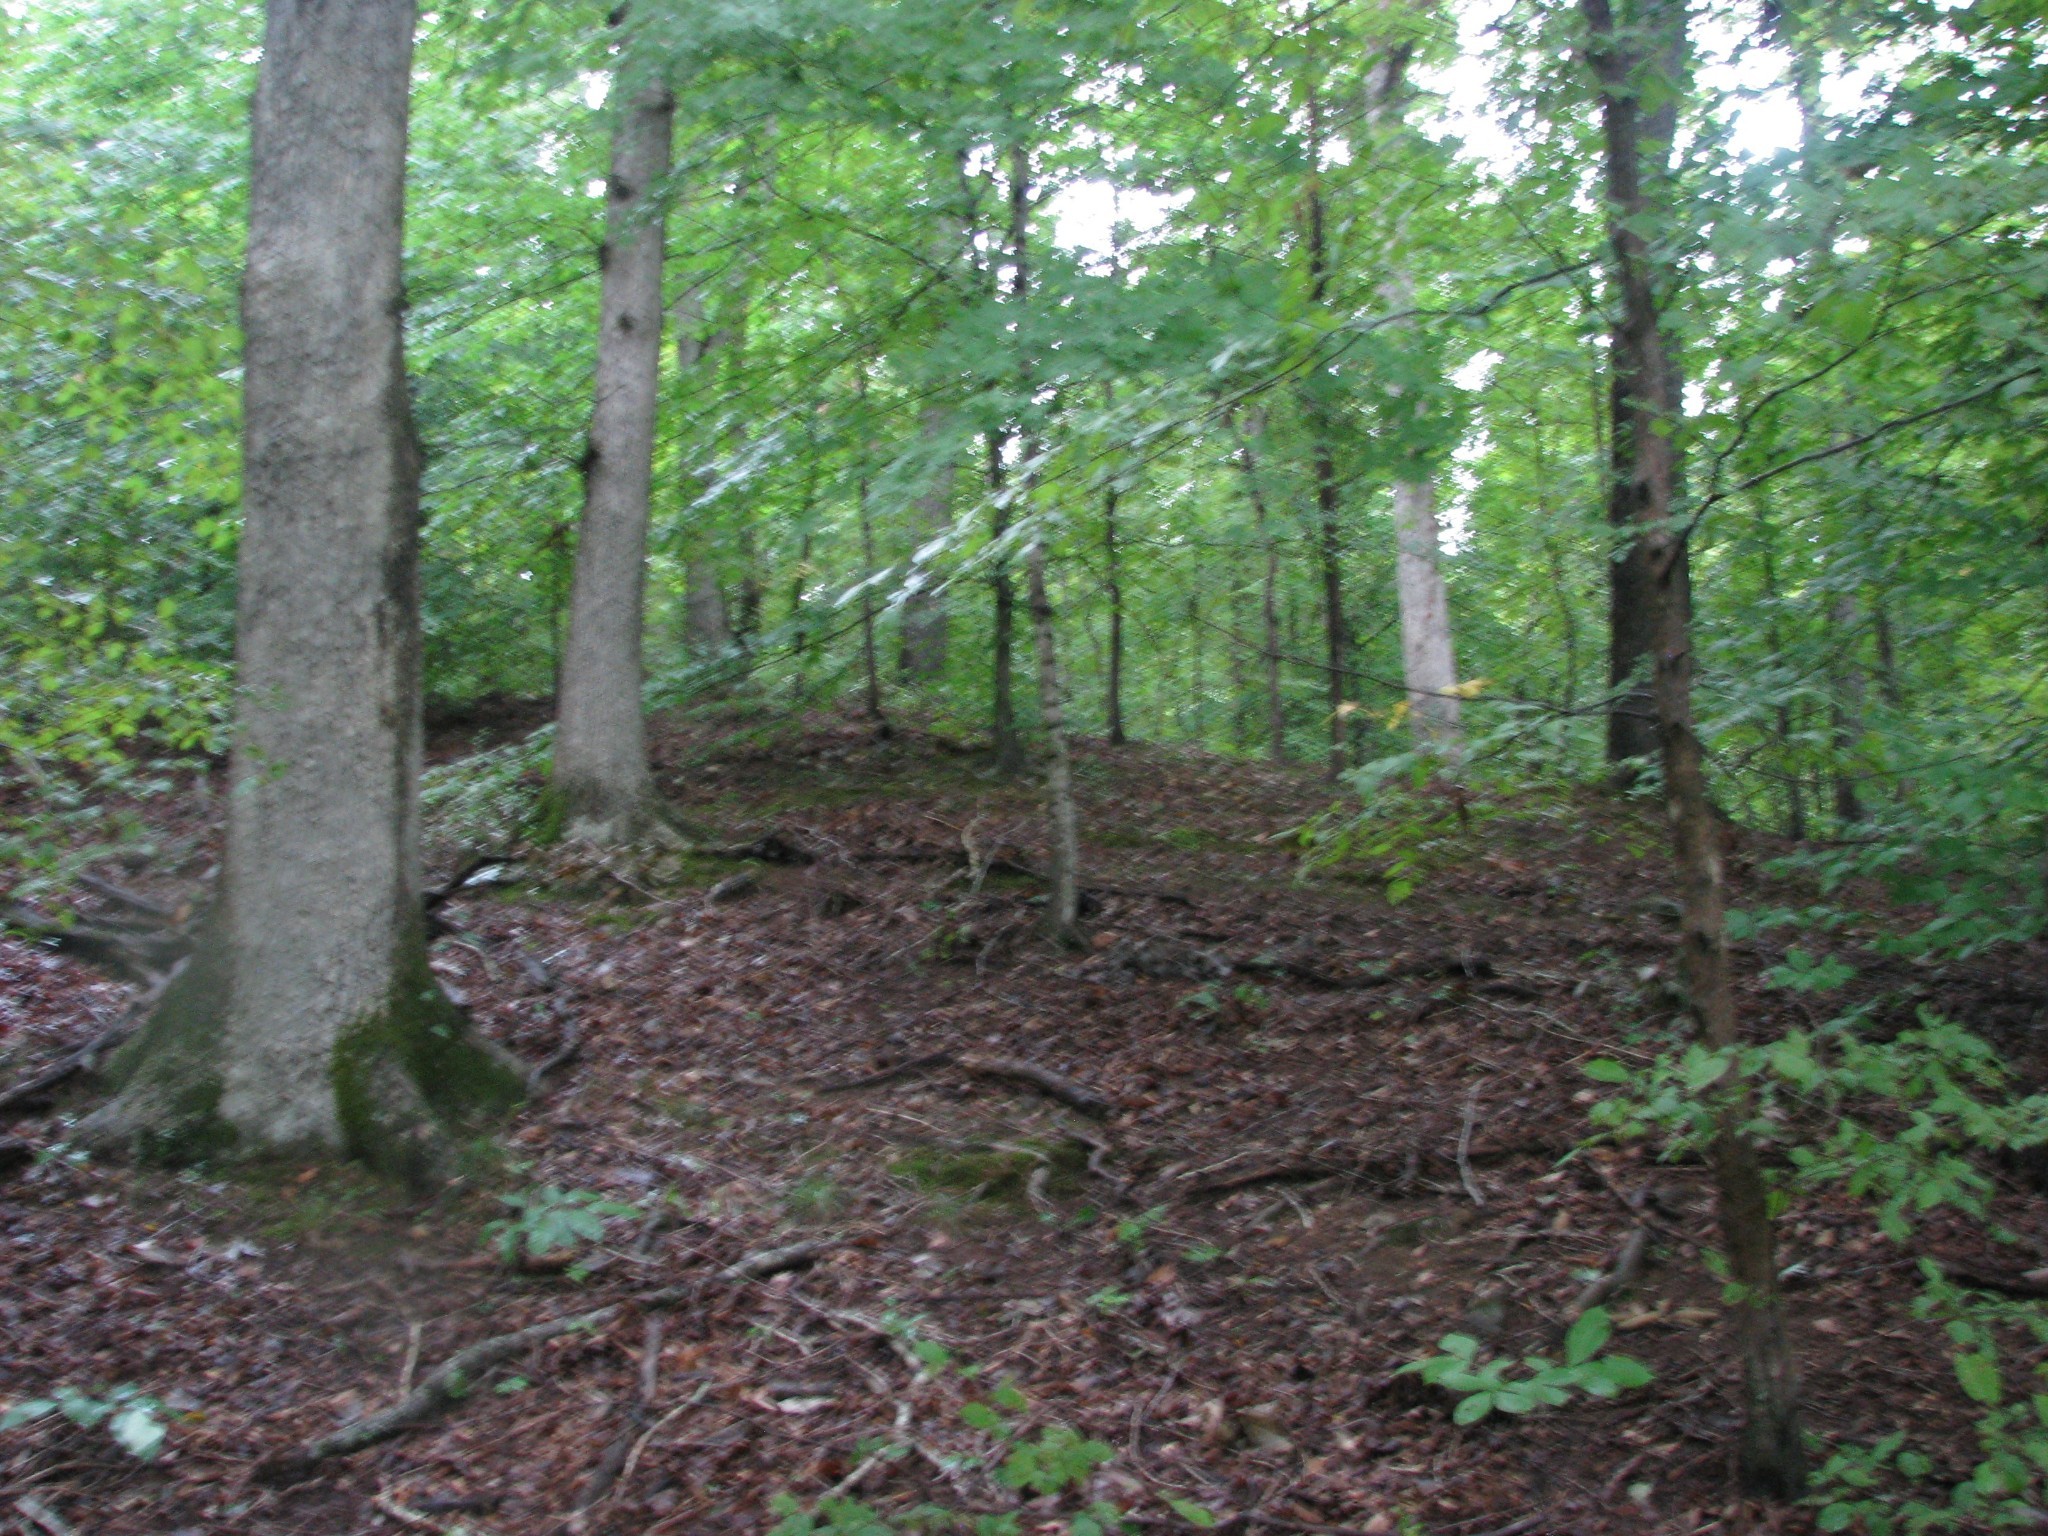 a view of a forest that has large trees